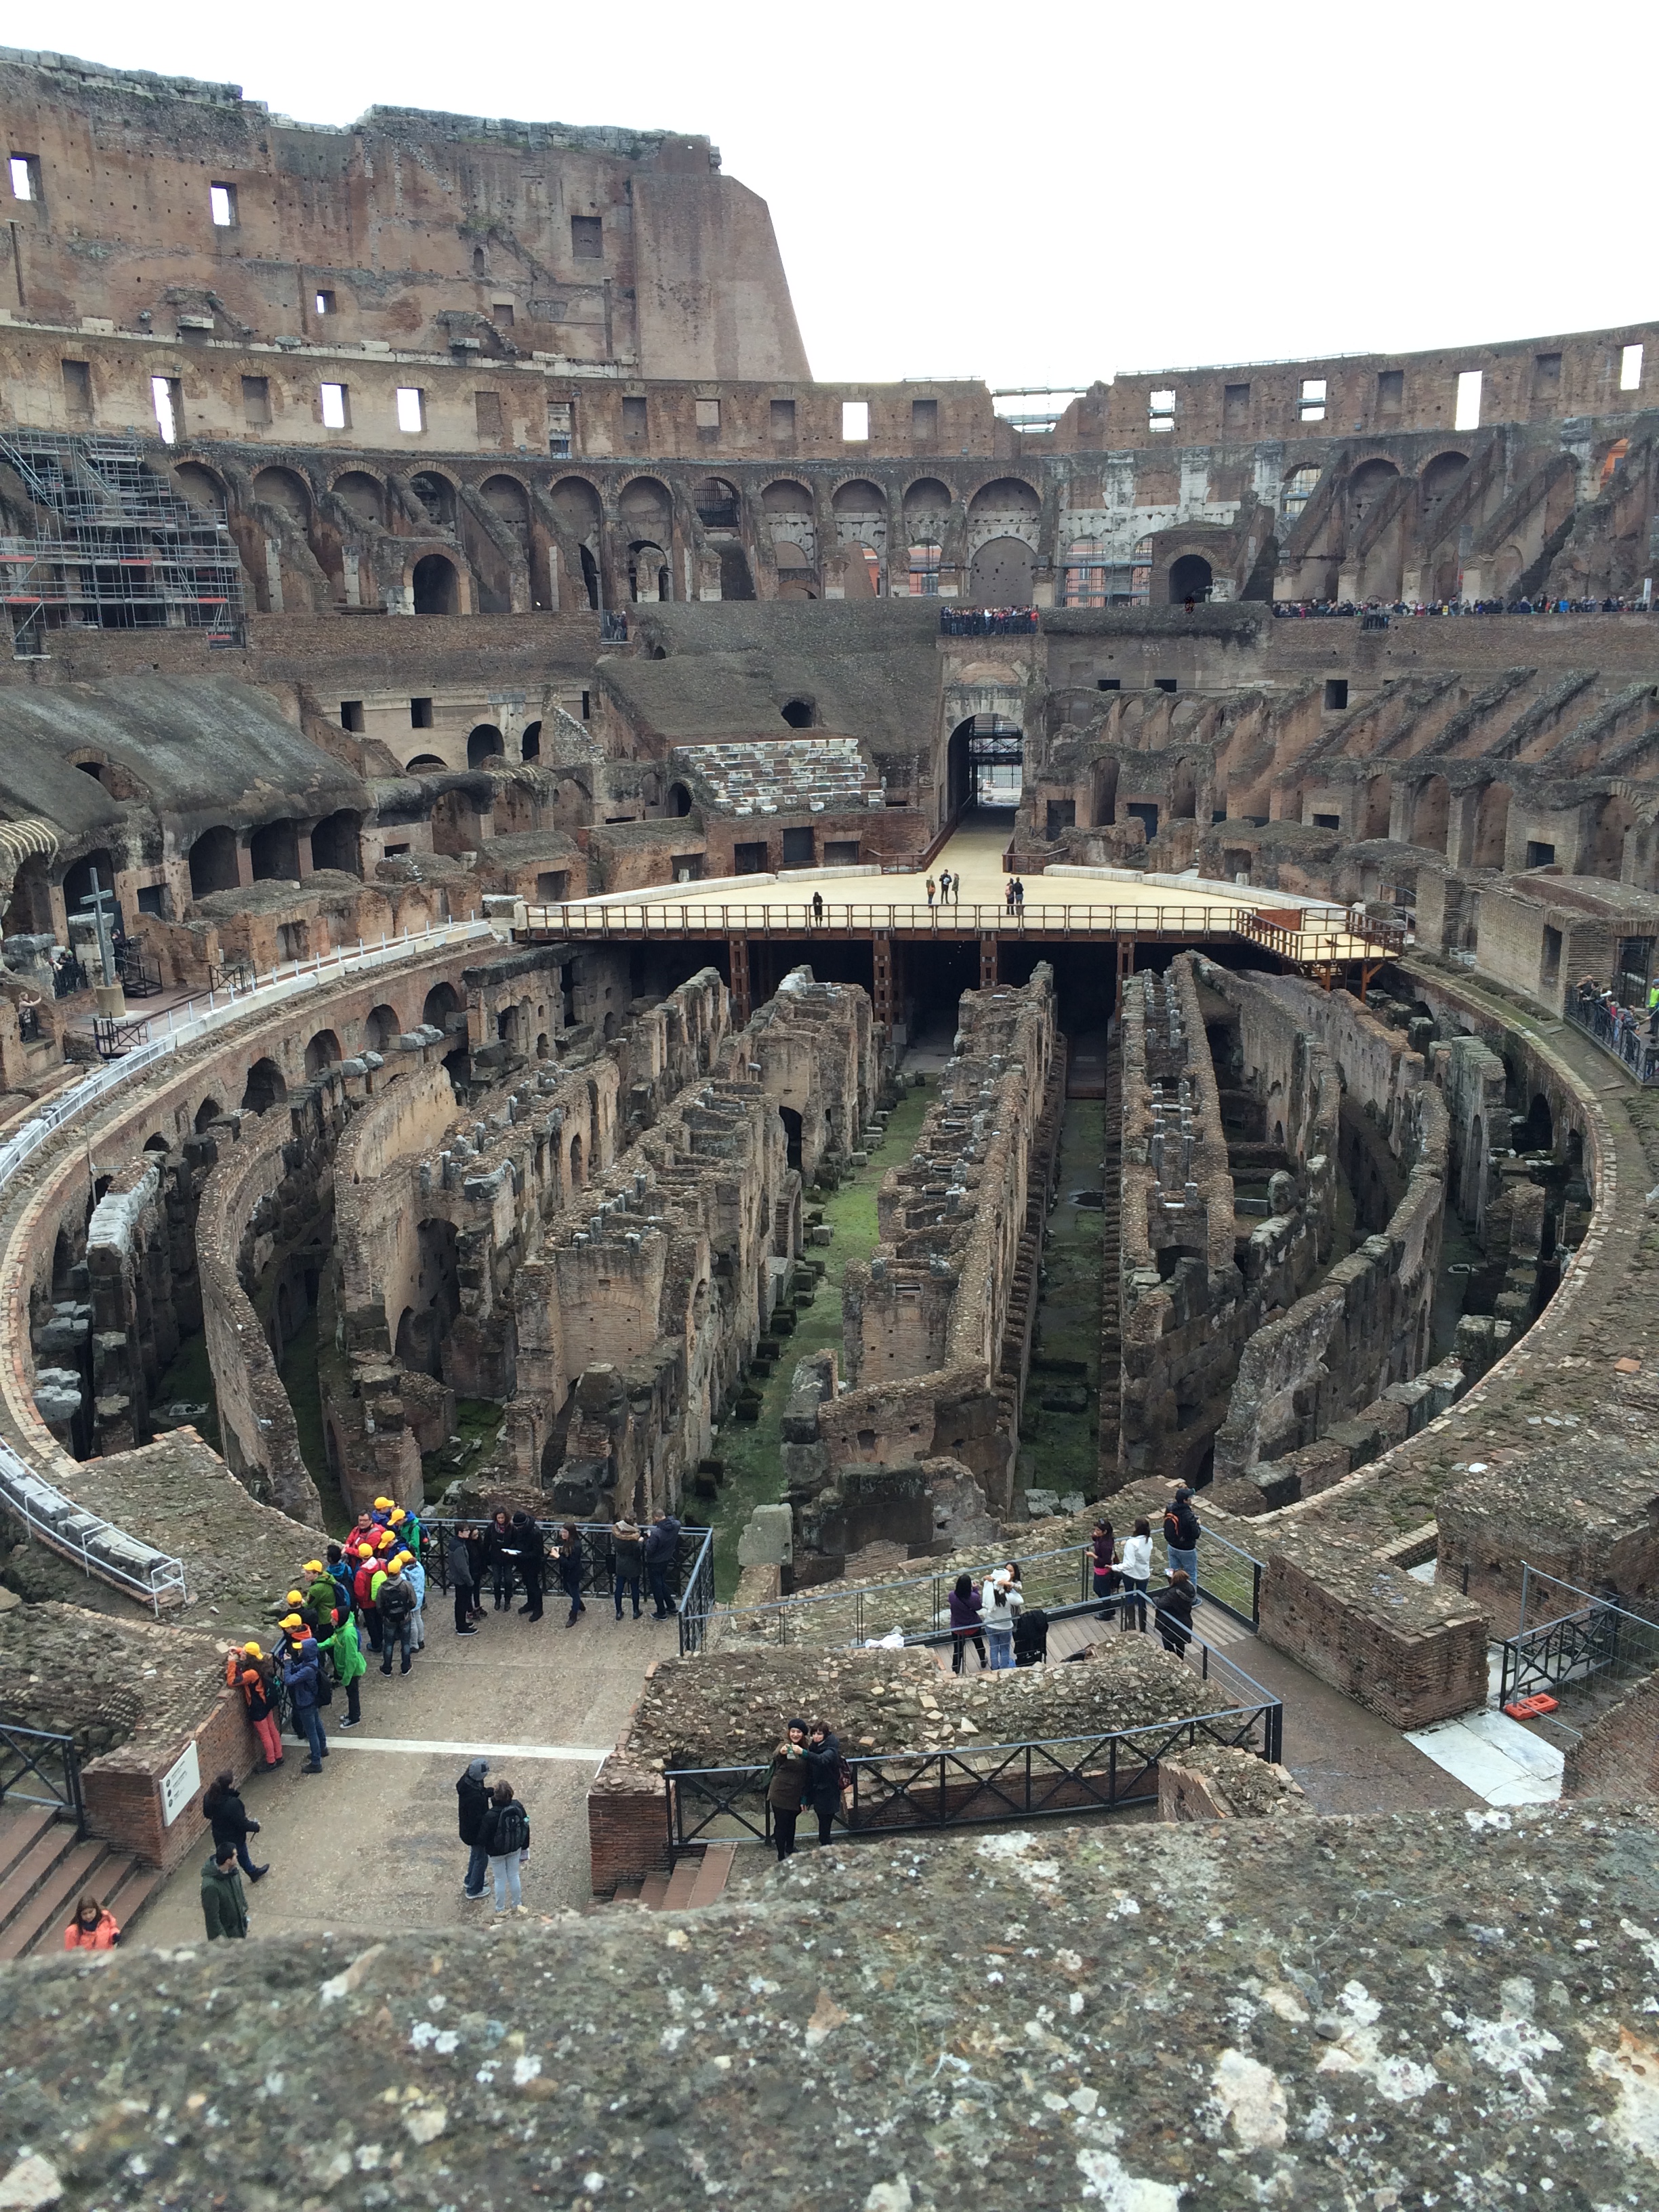 Image of the Colosseum